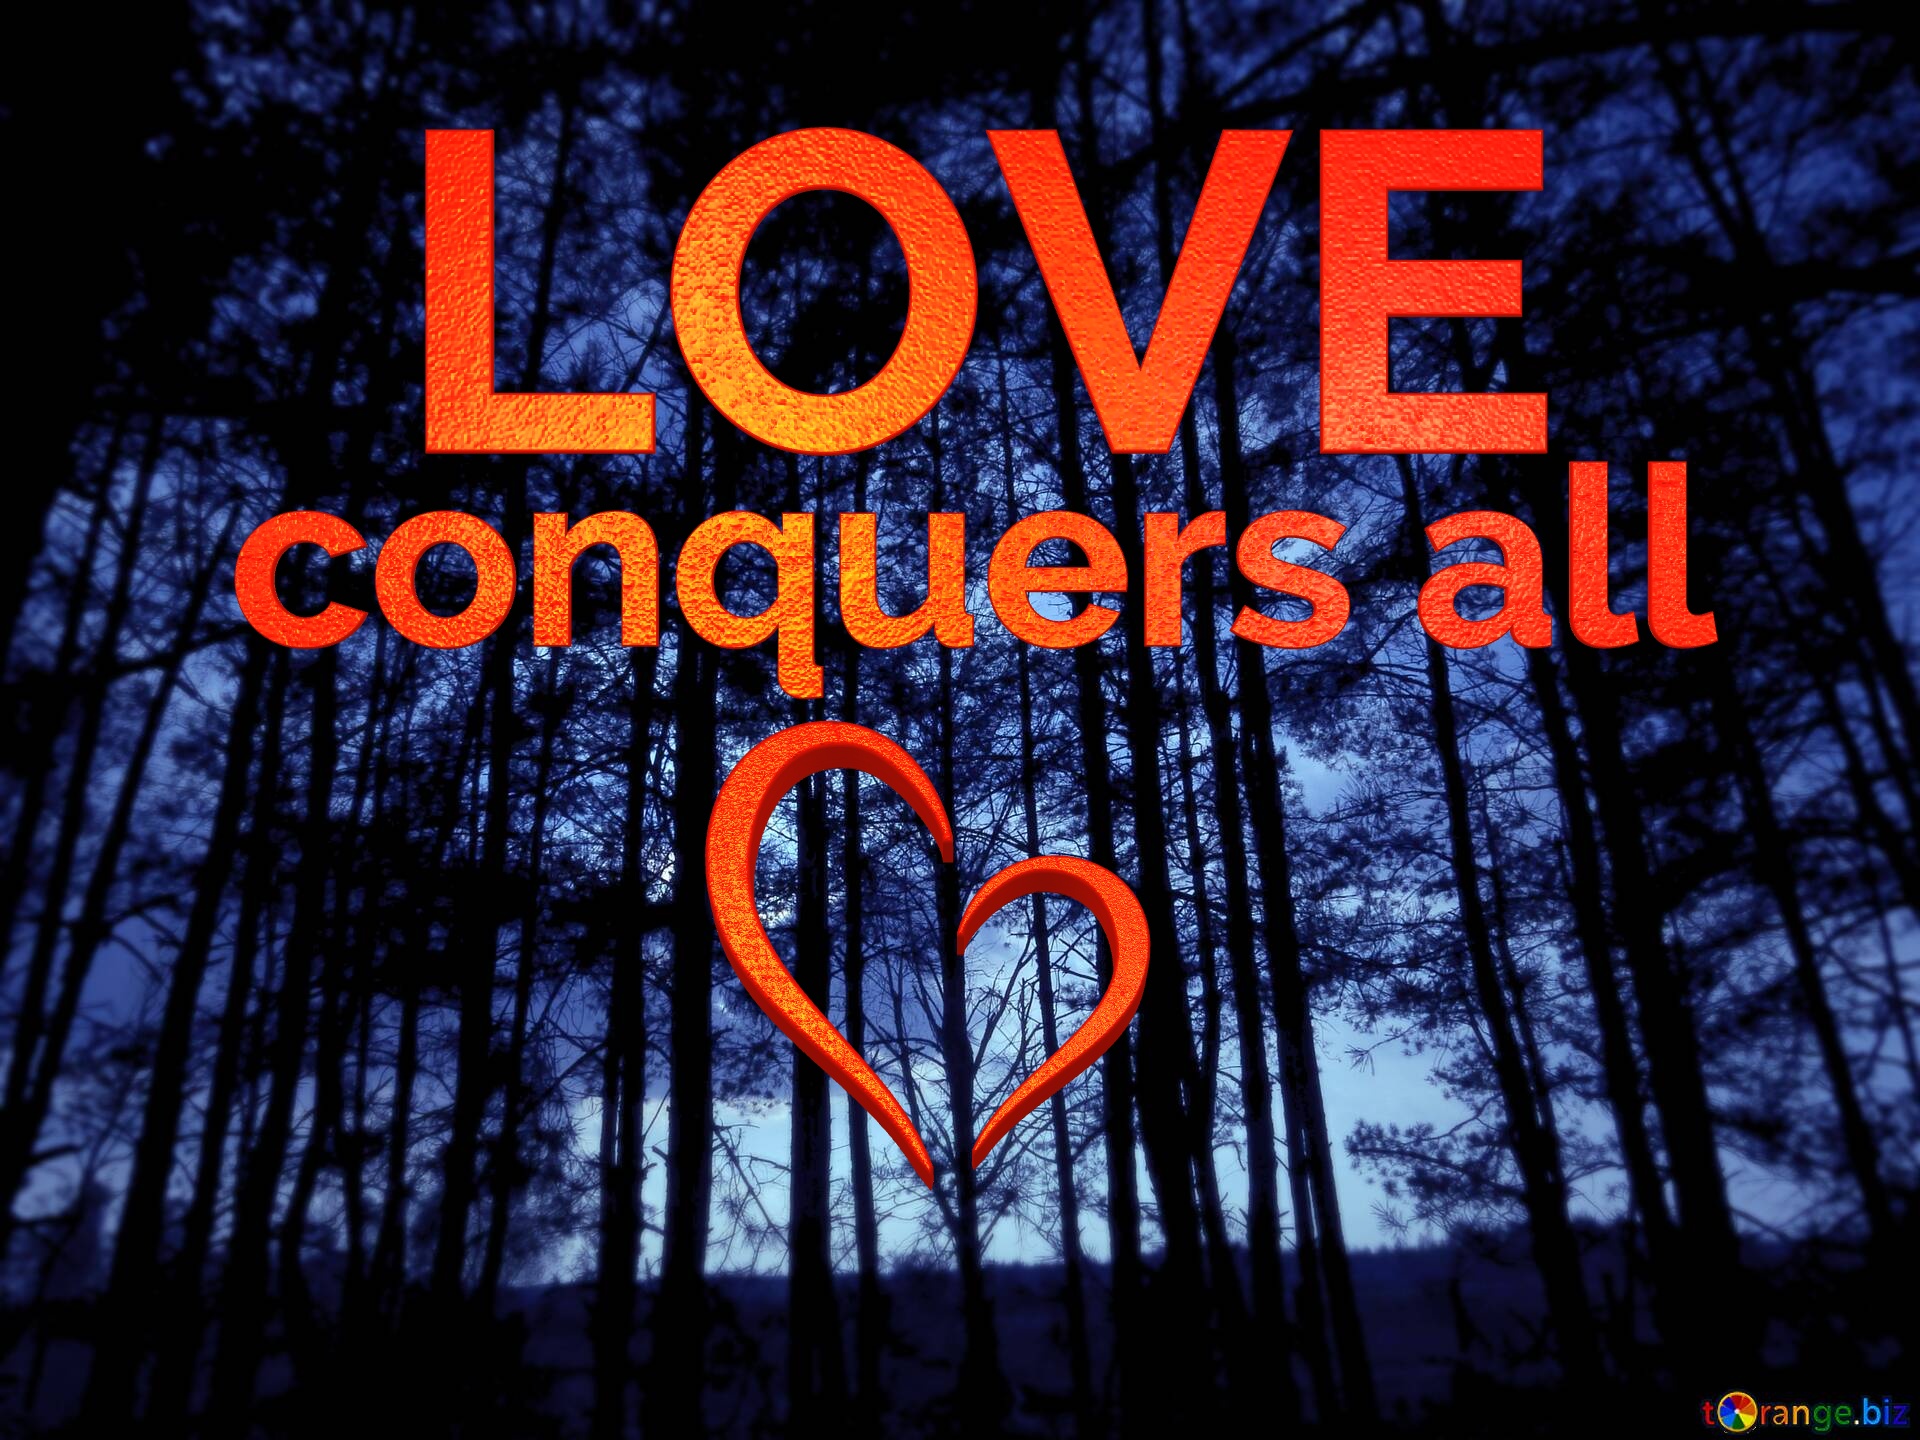 LOVE conquers all Dark forest fog night №0